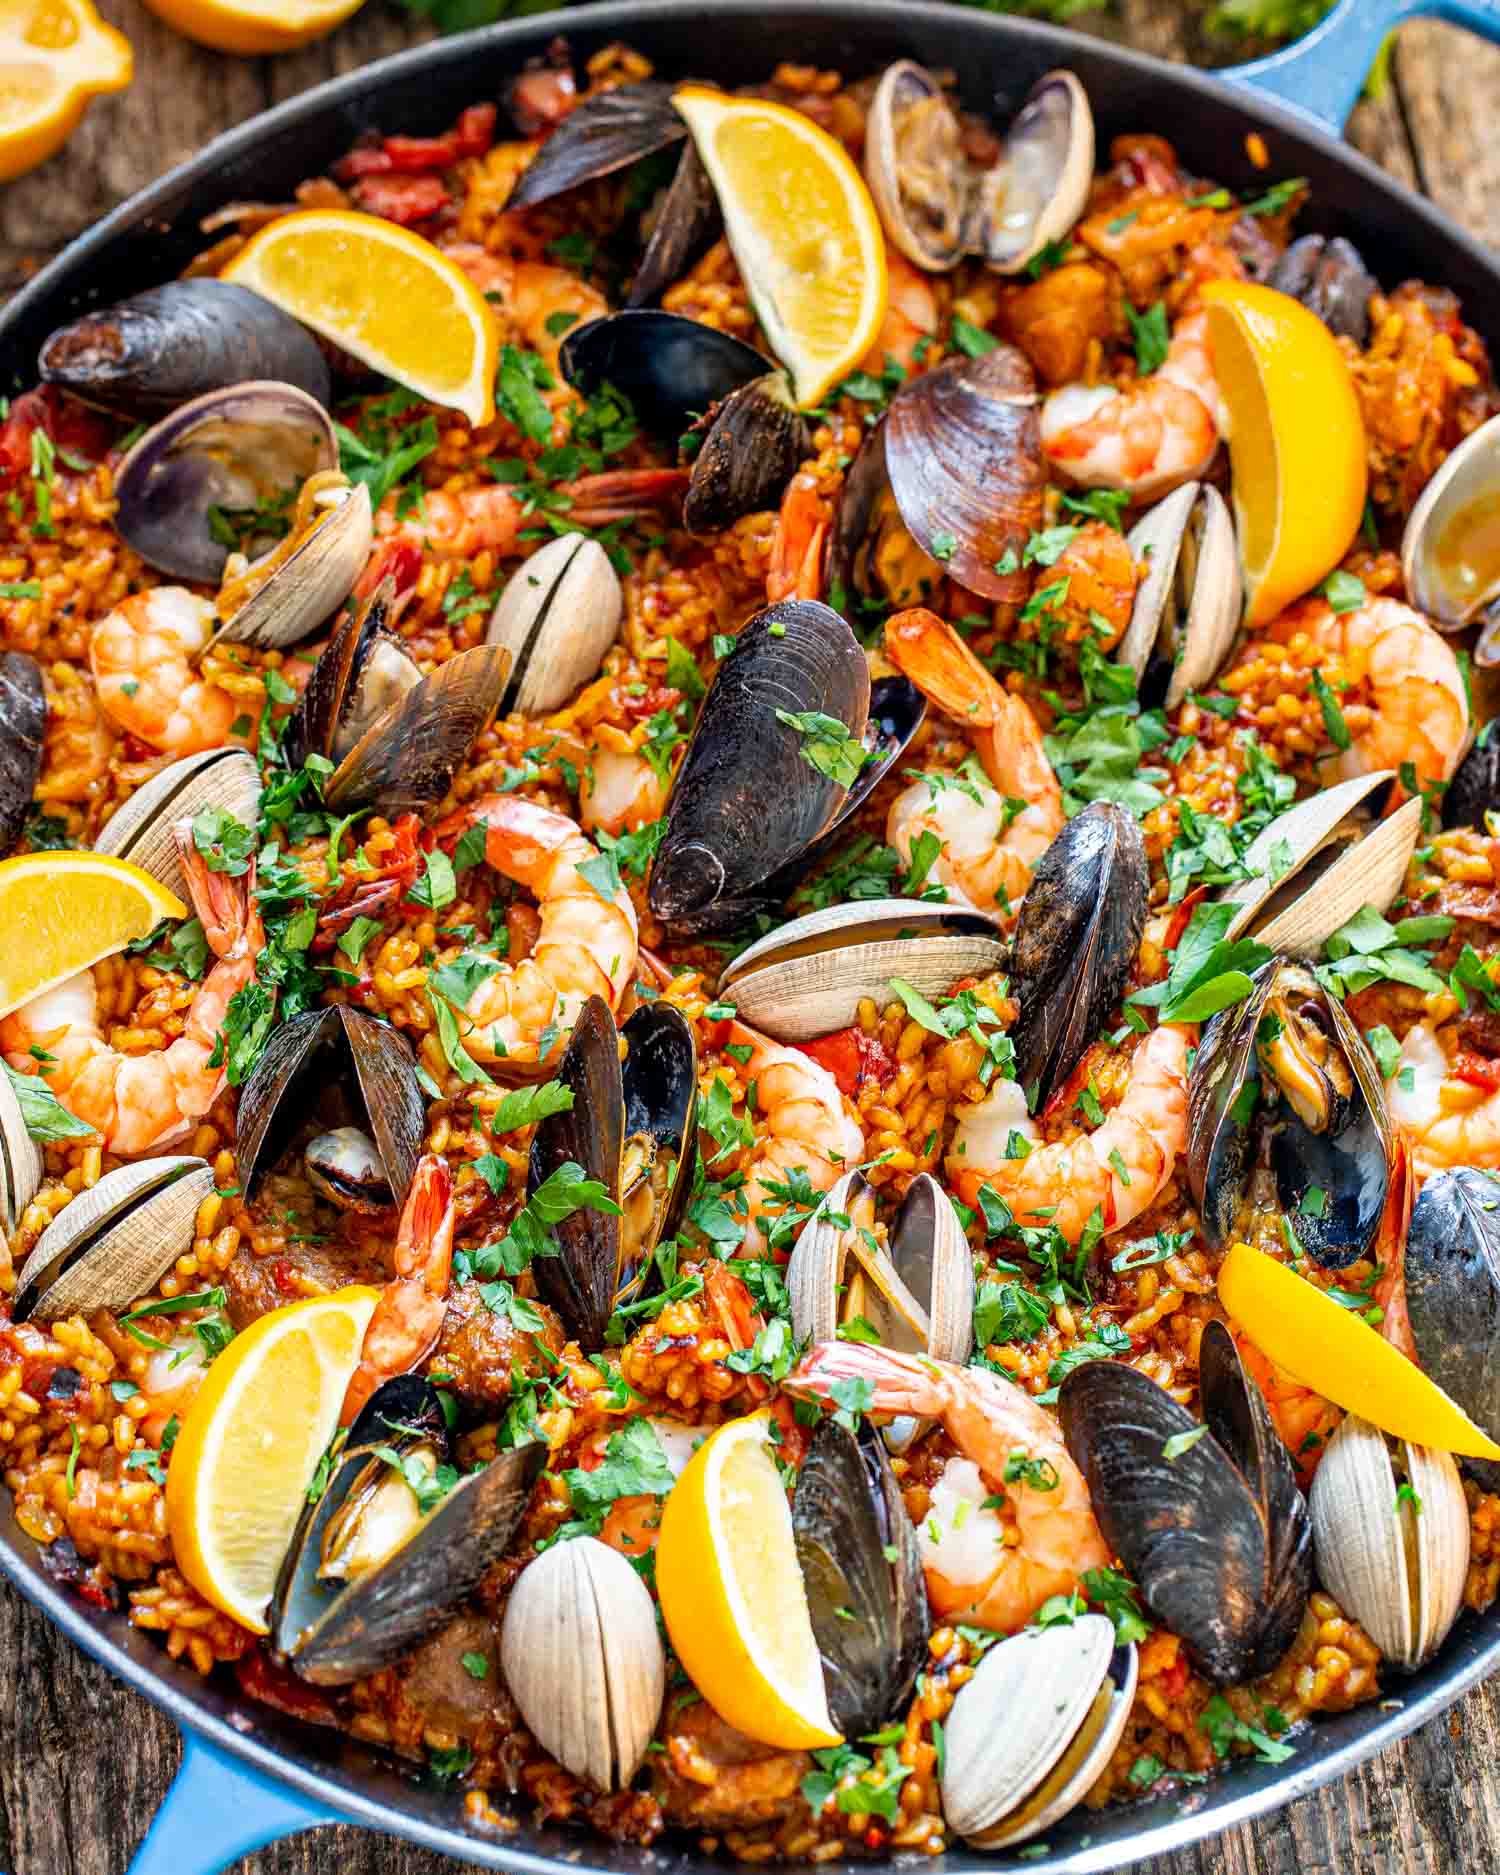 freshly made paella in a paella pan garnished with lemons and parsley.